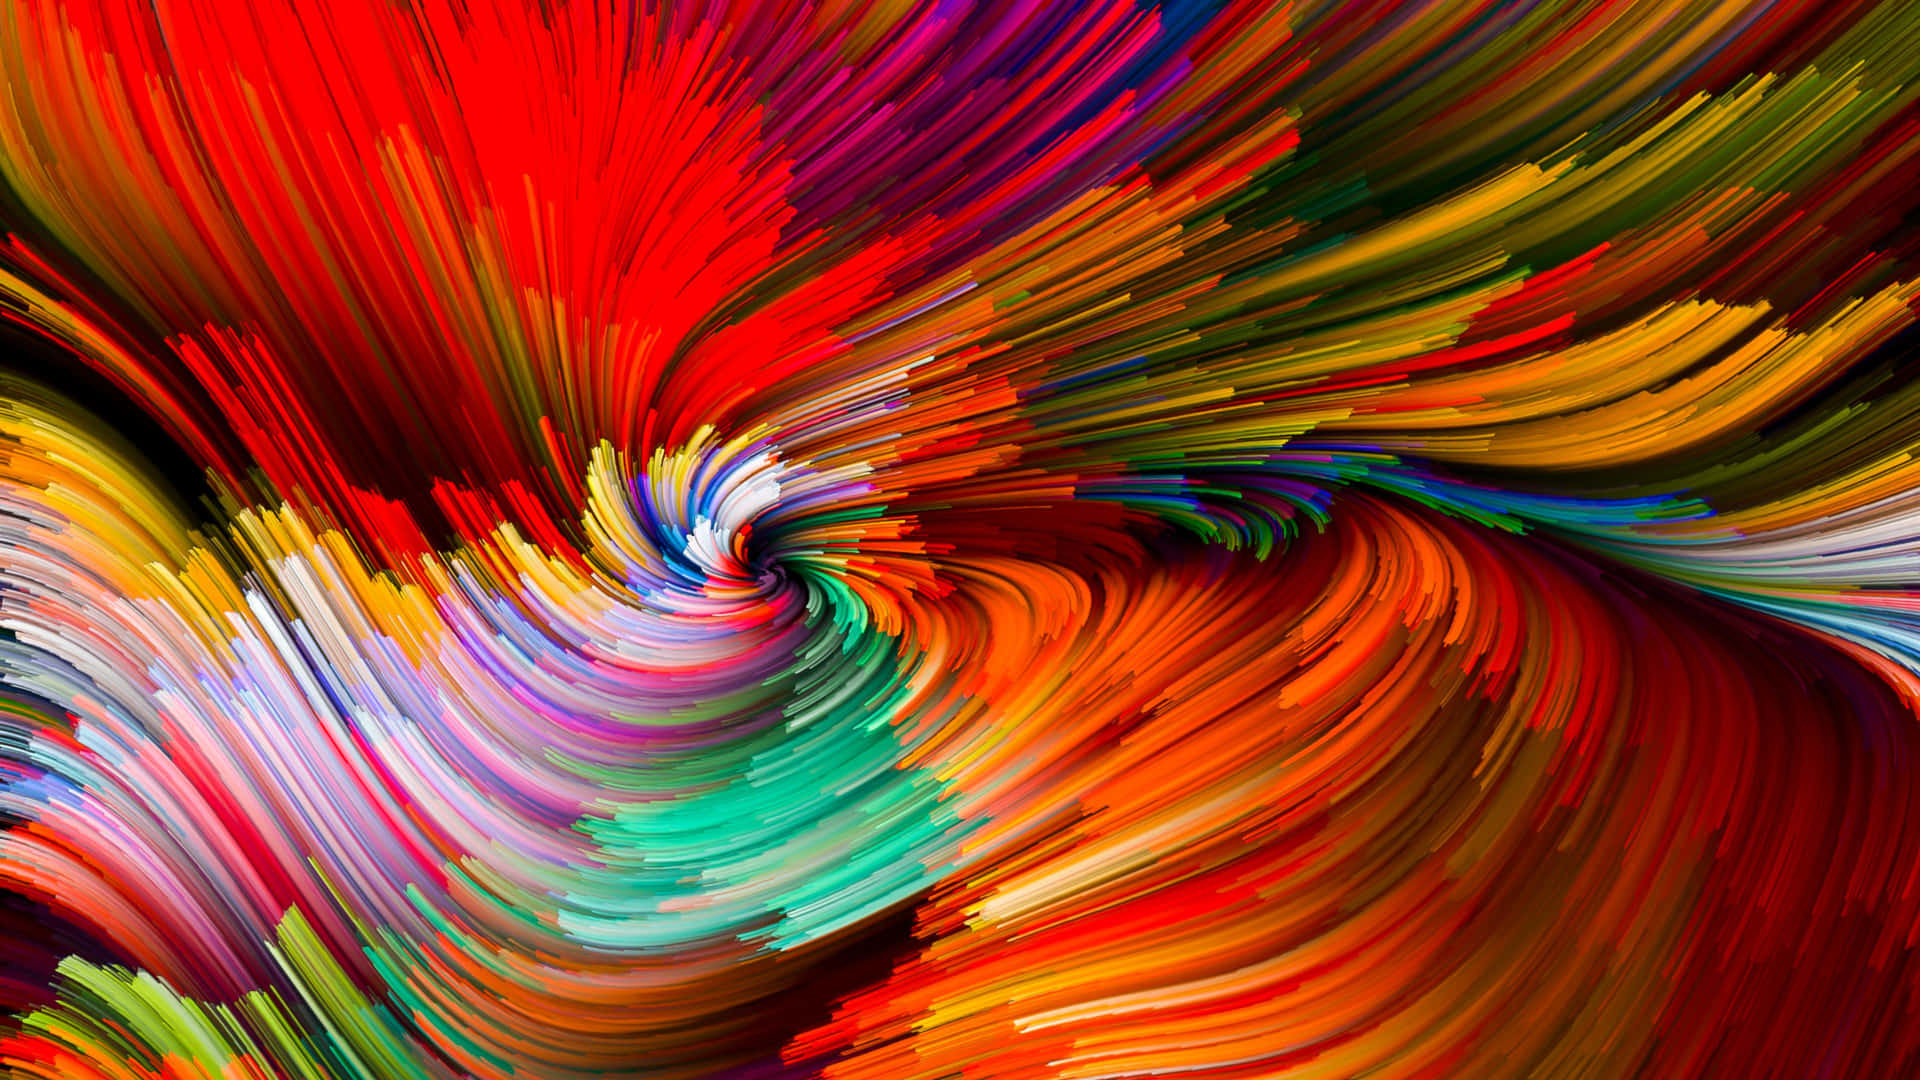 Abstract Colorful Swirls Of Paint